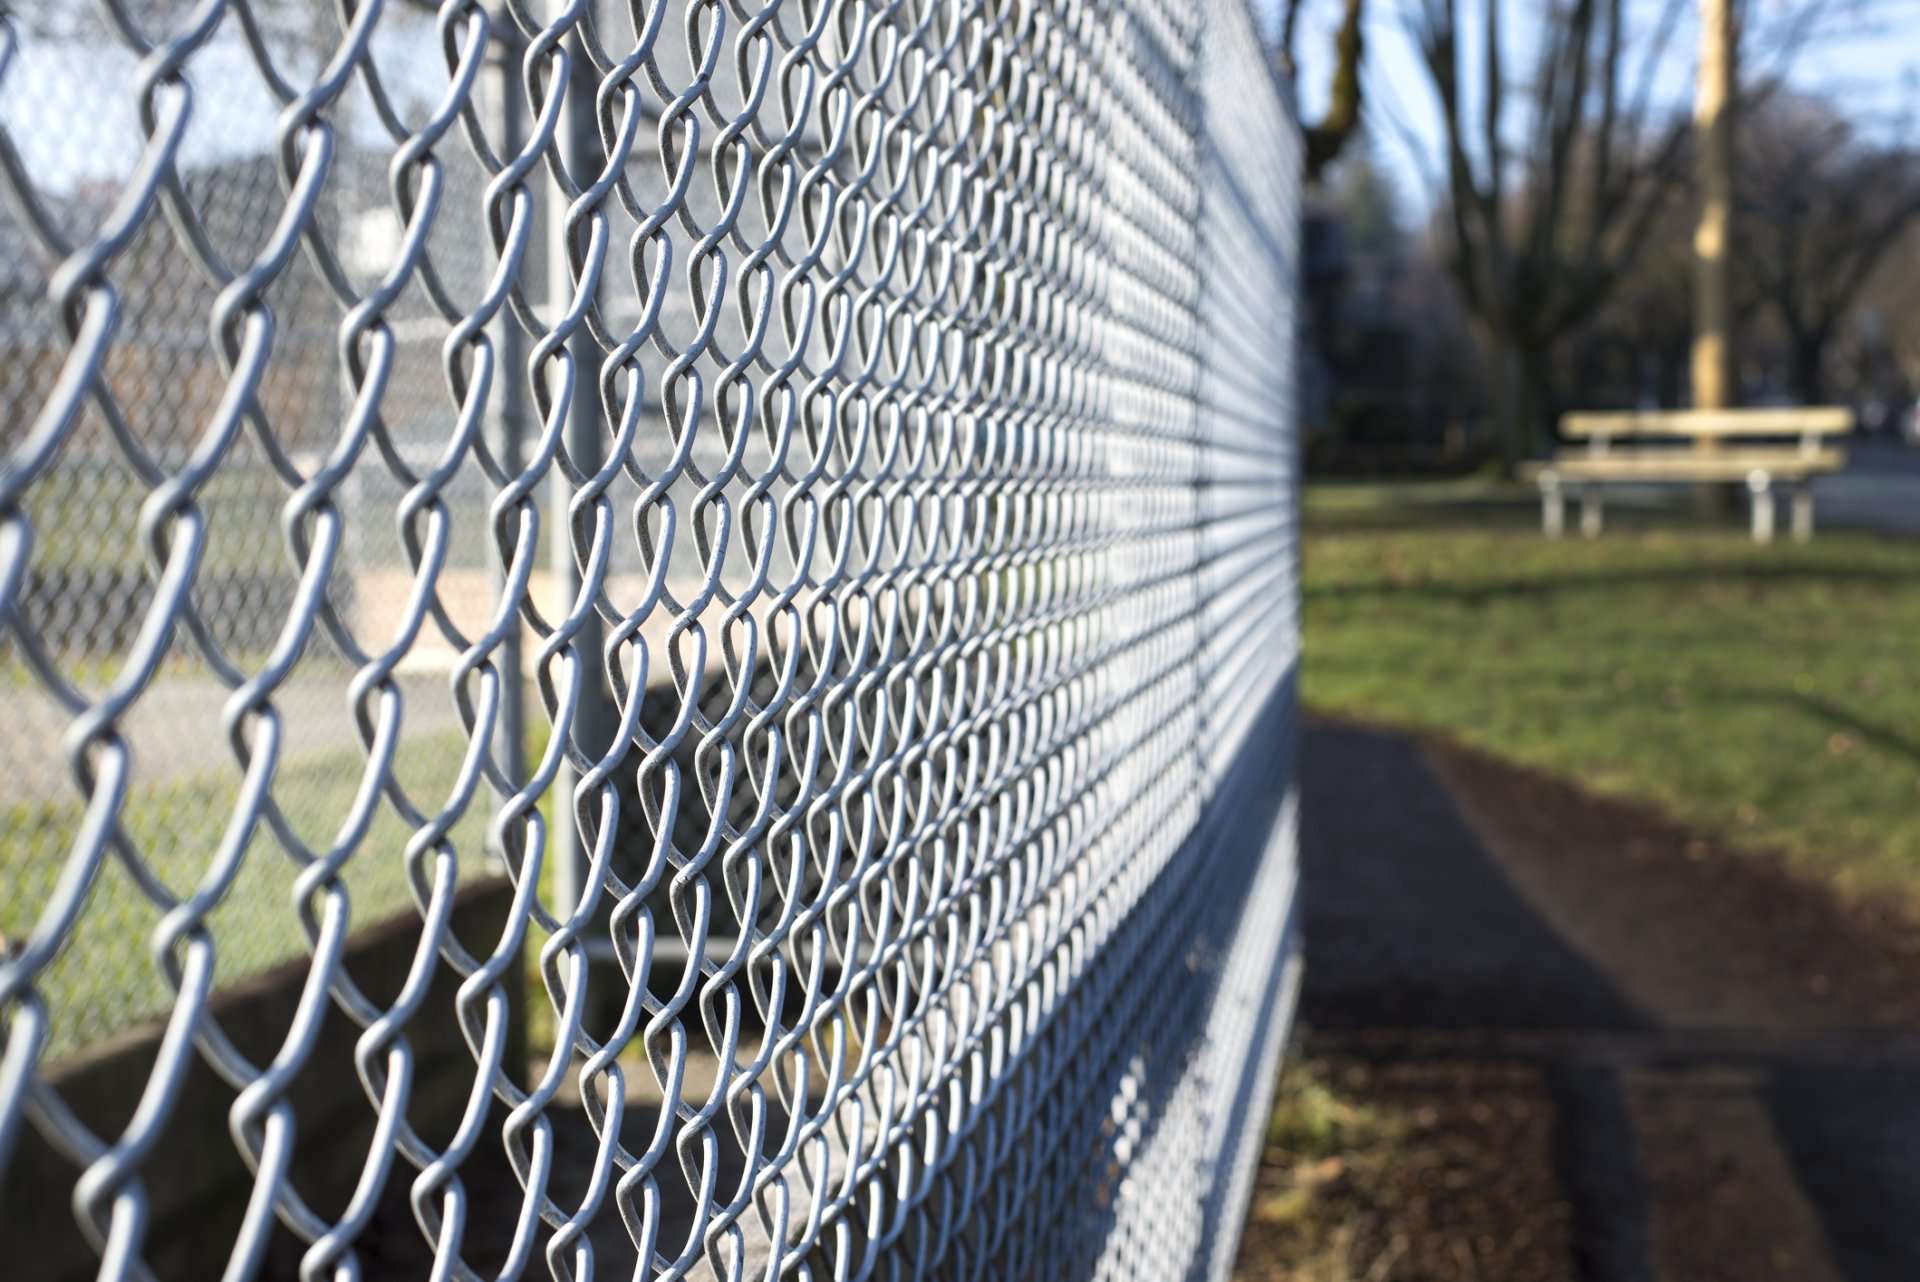 A chain link fence with grass in the background.